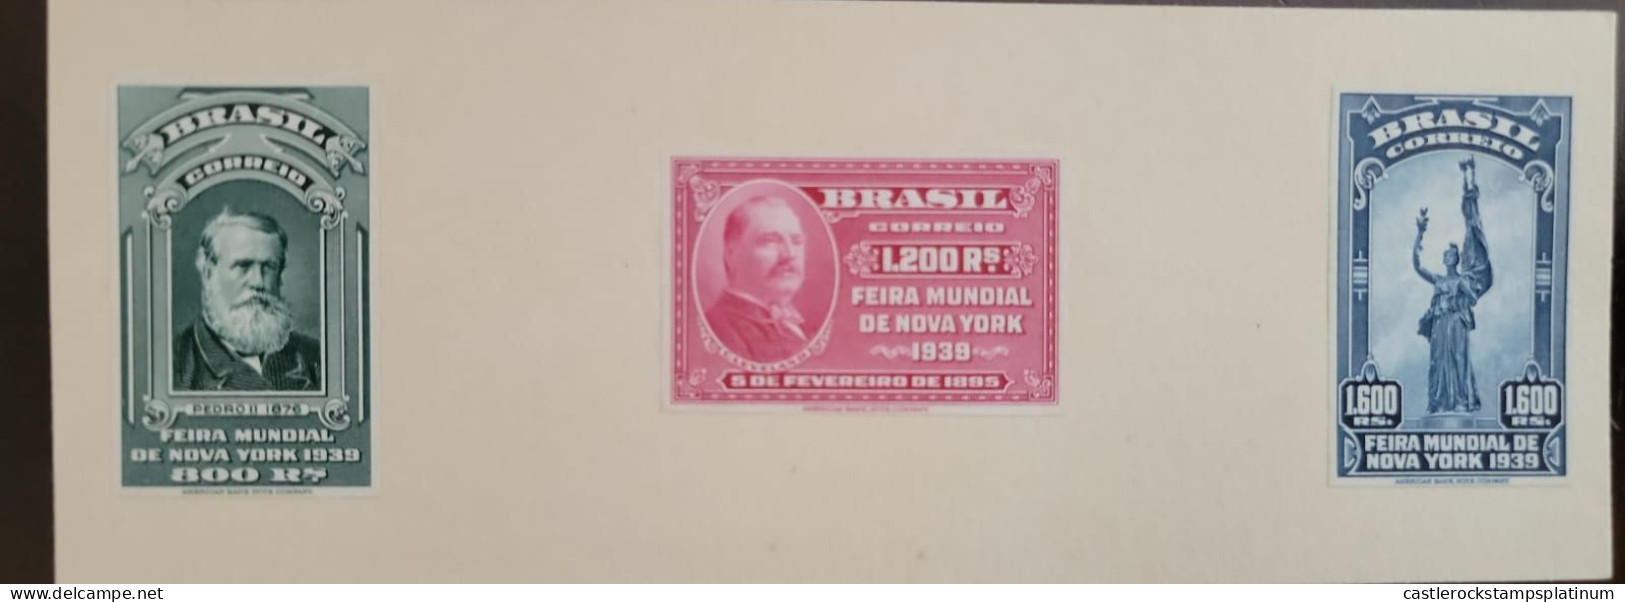 O) 1930 BRAZIL, PROOF AMERICAN BANK NOTE, EMPEROR  PEDRO II, GTOVER CLEVELAND, STATUE OF FRIENDSHIP - GIVEN BY US, NEW Y - Ecuador